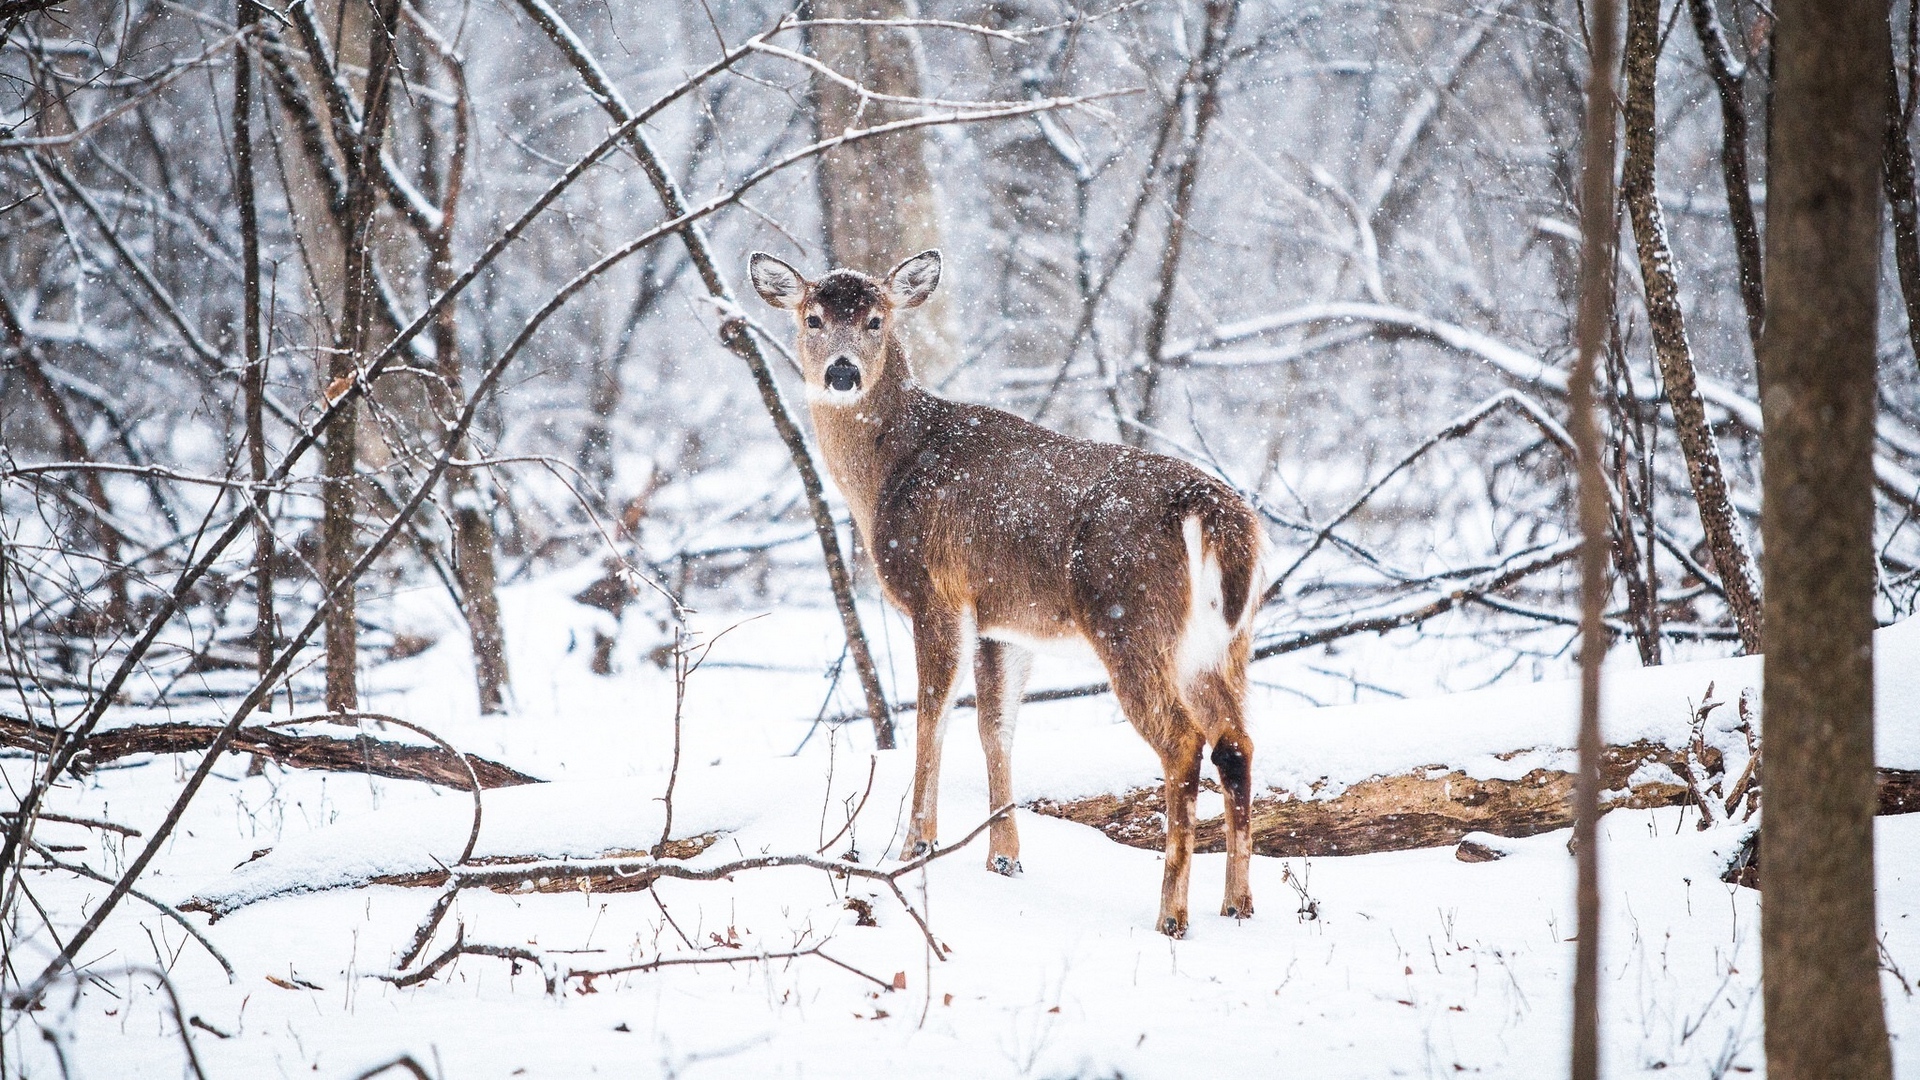 Download wallpaper 1920x1080 deer, forest, snow, trees full